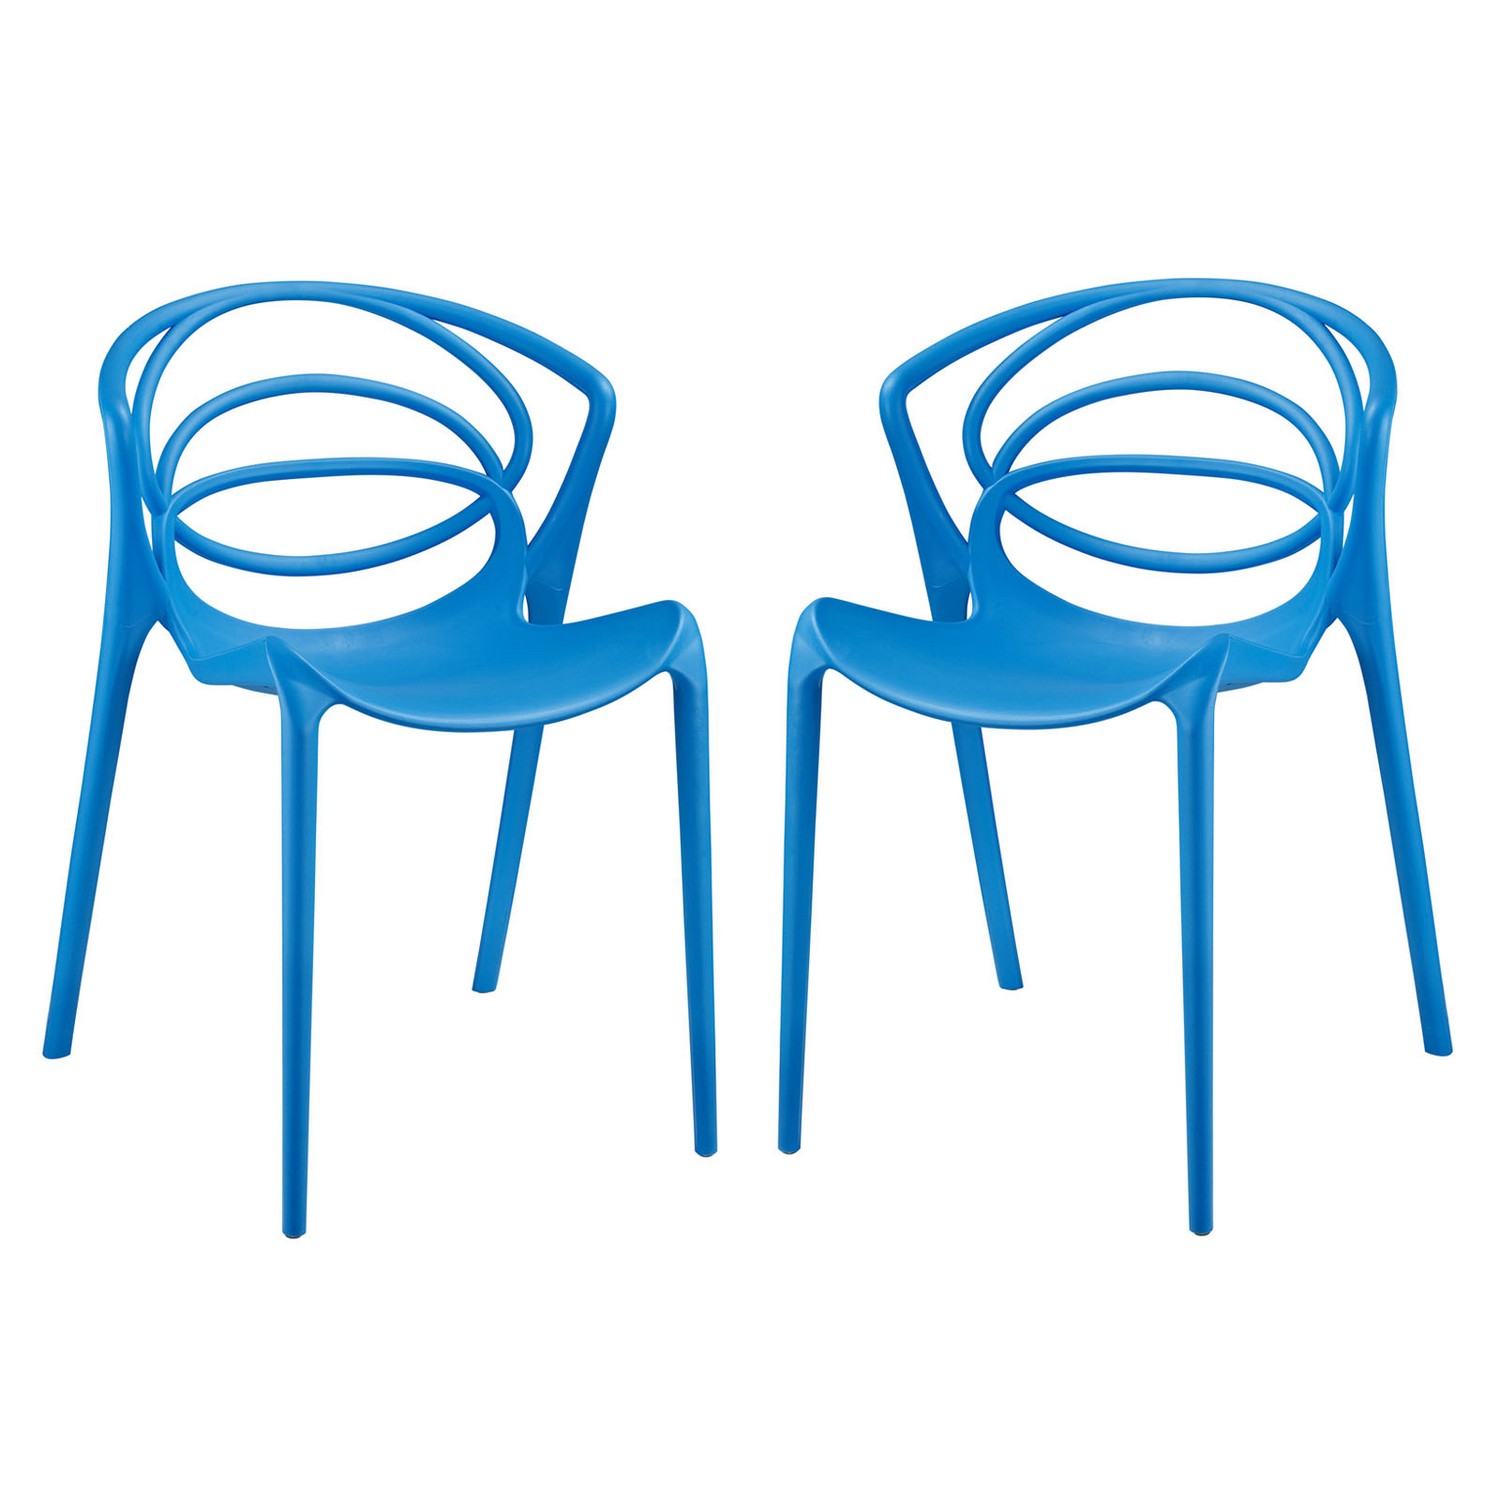 Modway Locus Dining Chair - Set of 2 - Blue